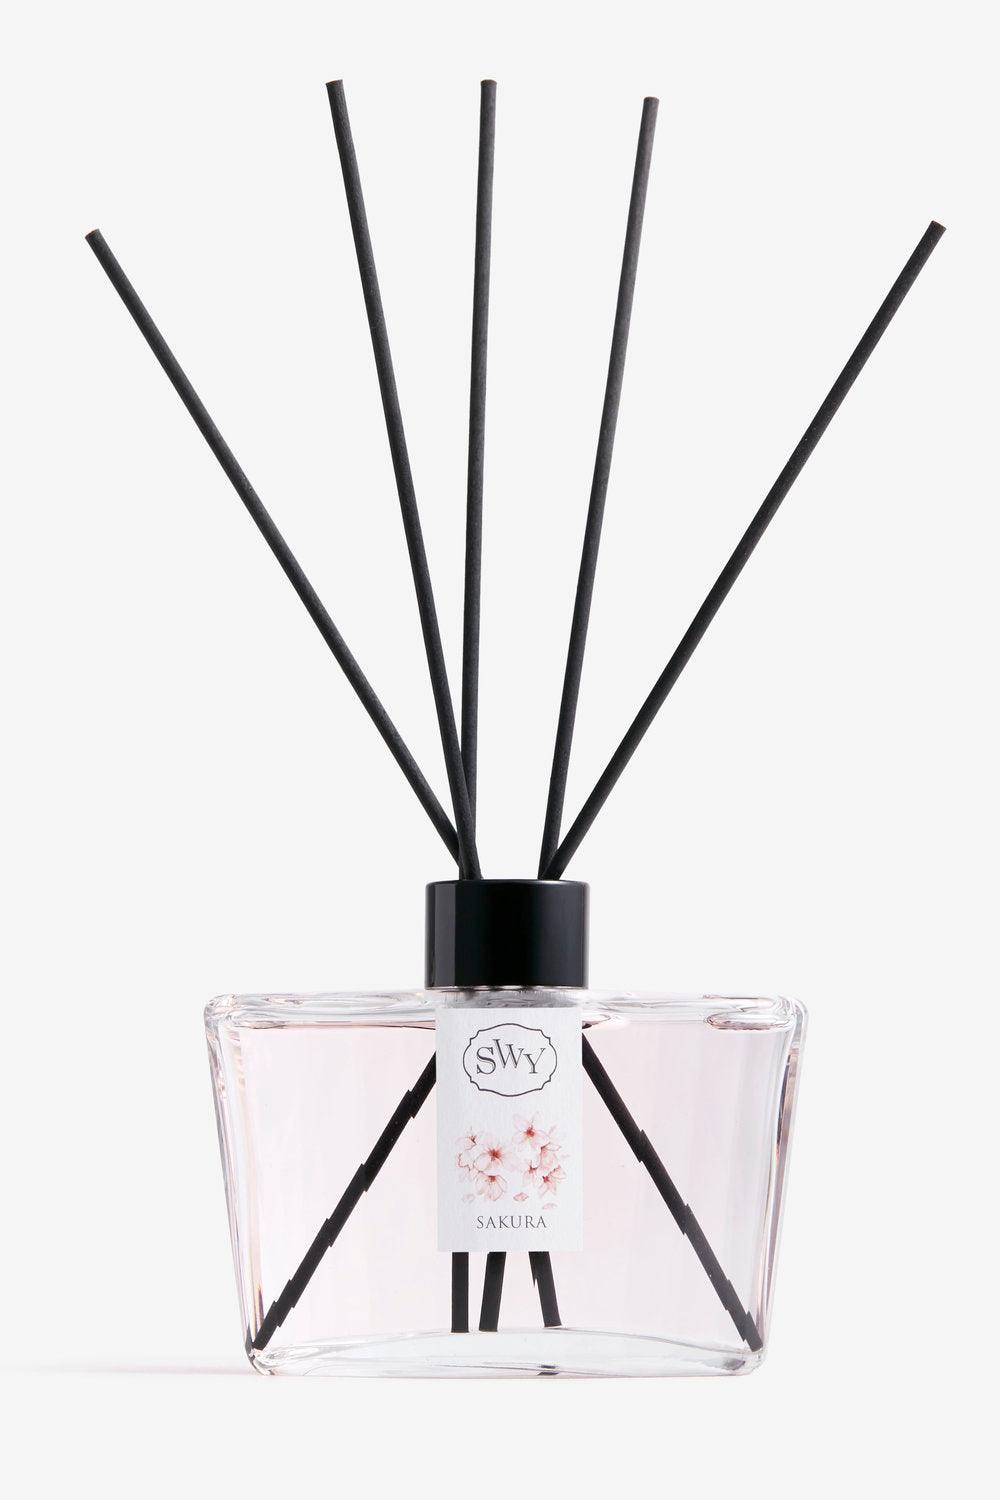 Reeds Diffuser – Sakura - SWY - Scent With You